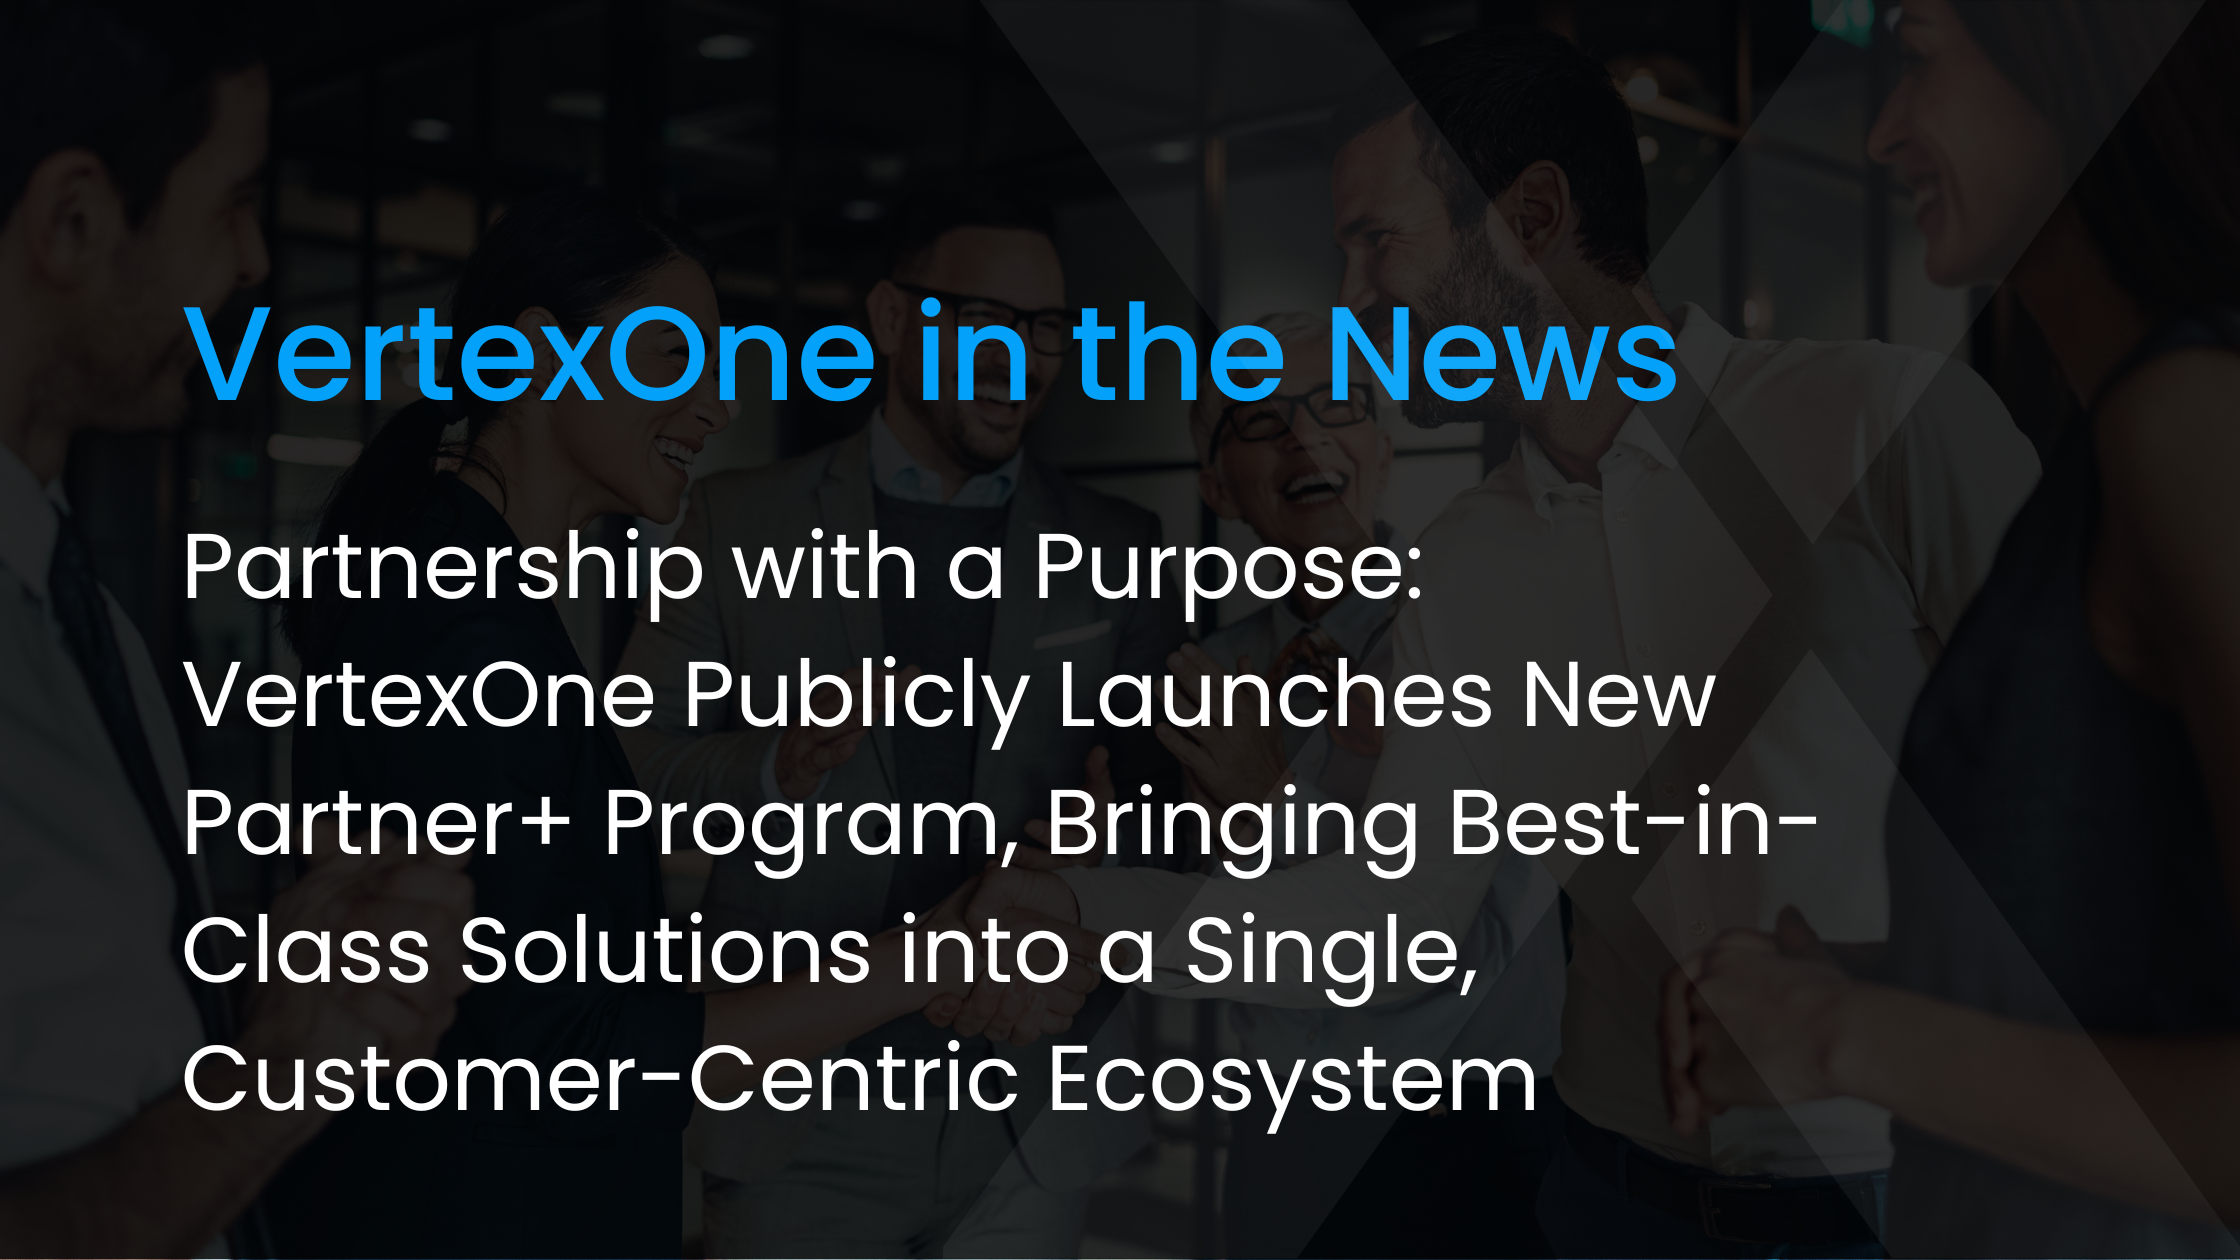 Partnership with a Purpose: VertexOne Publicly Launches New Partner+ Program, Bringing Best-in-Class Solutions into a Single, Customer-Centric Ecosystem